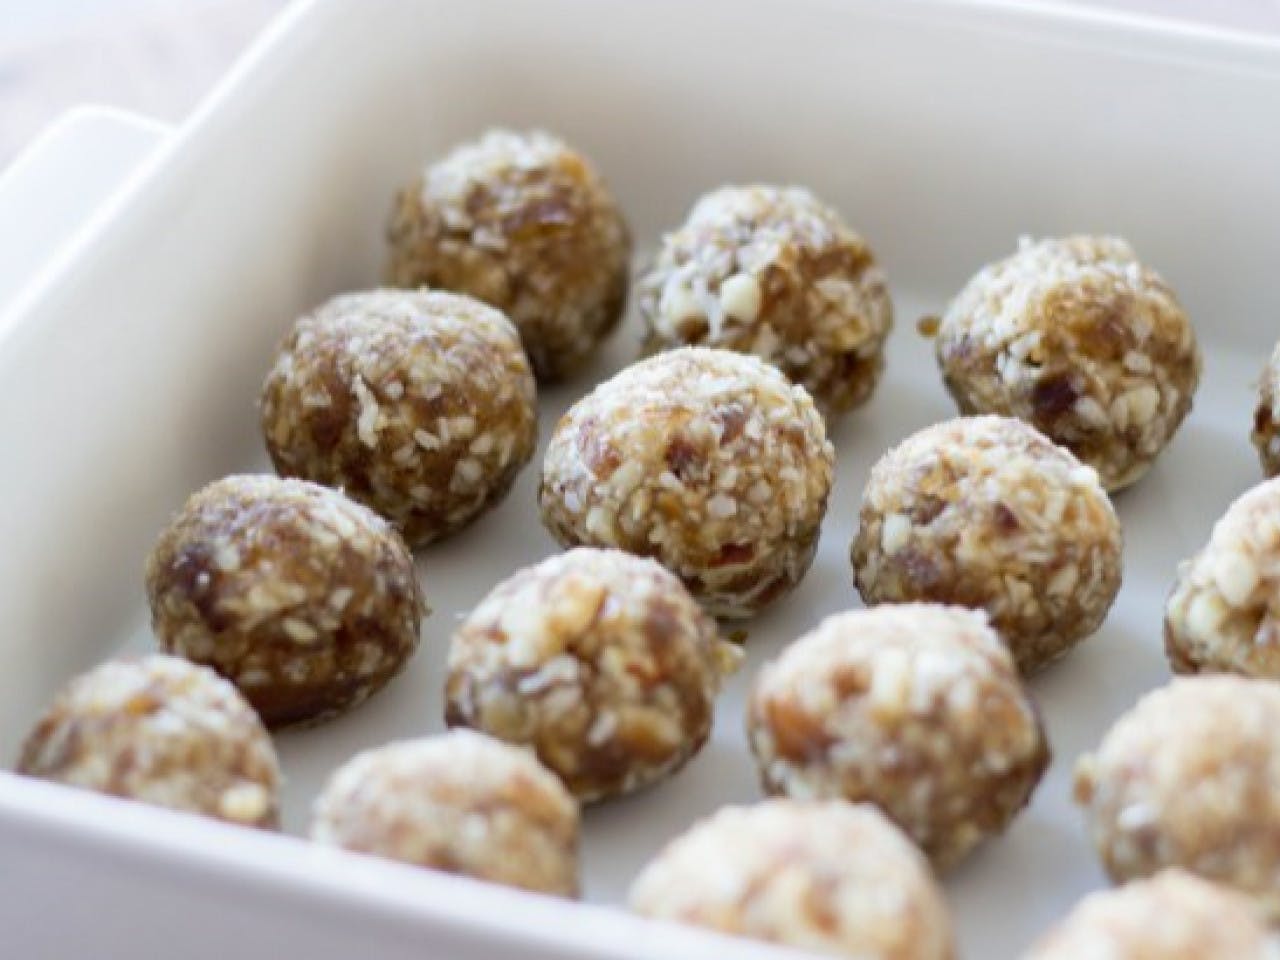 Superfood truffles with maca and cocoa